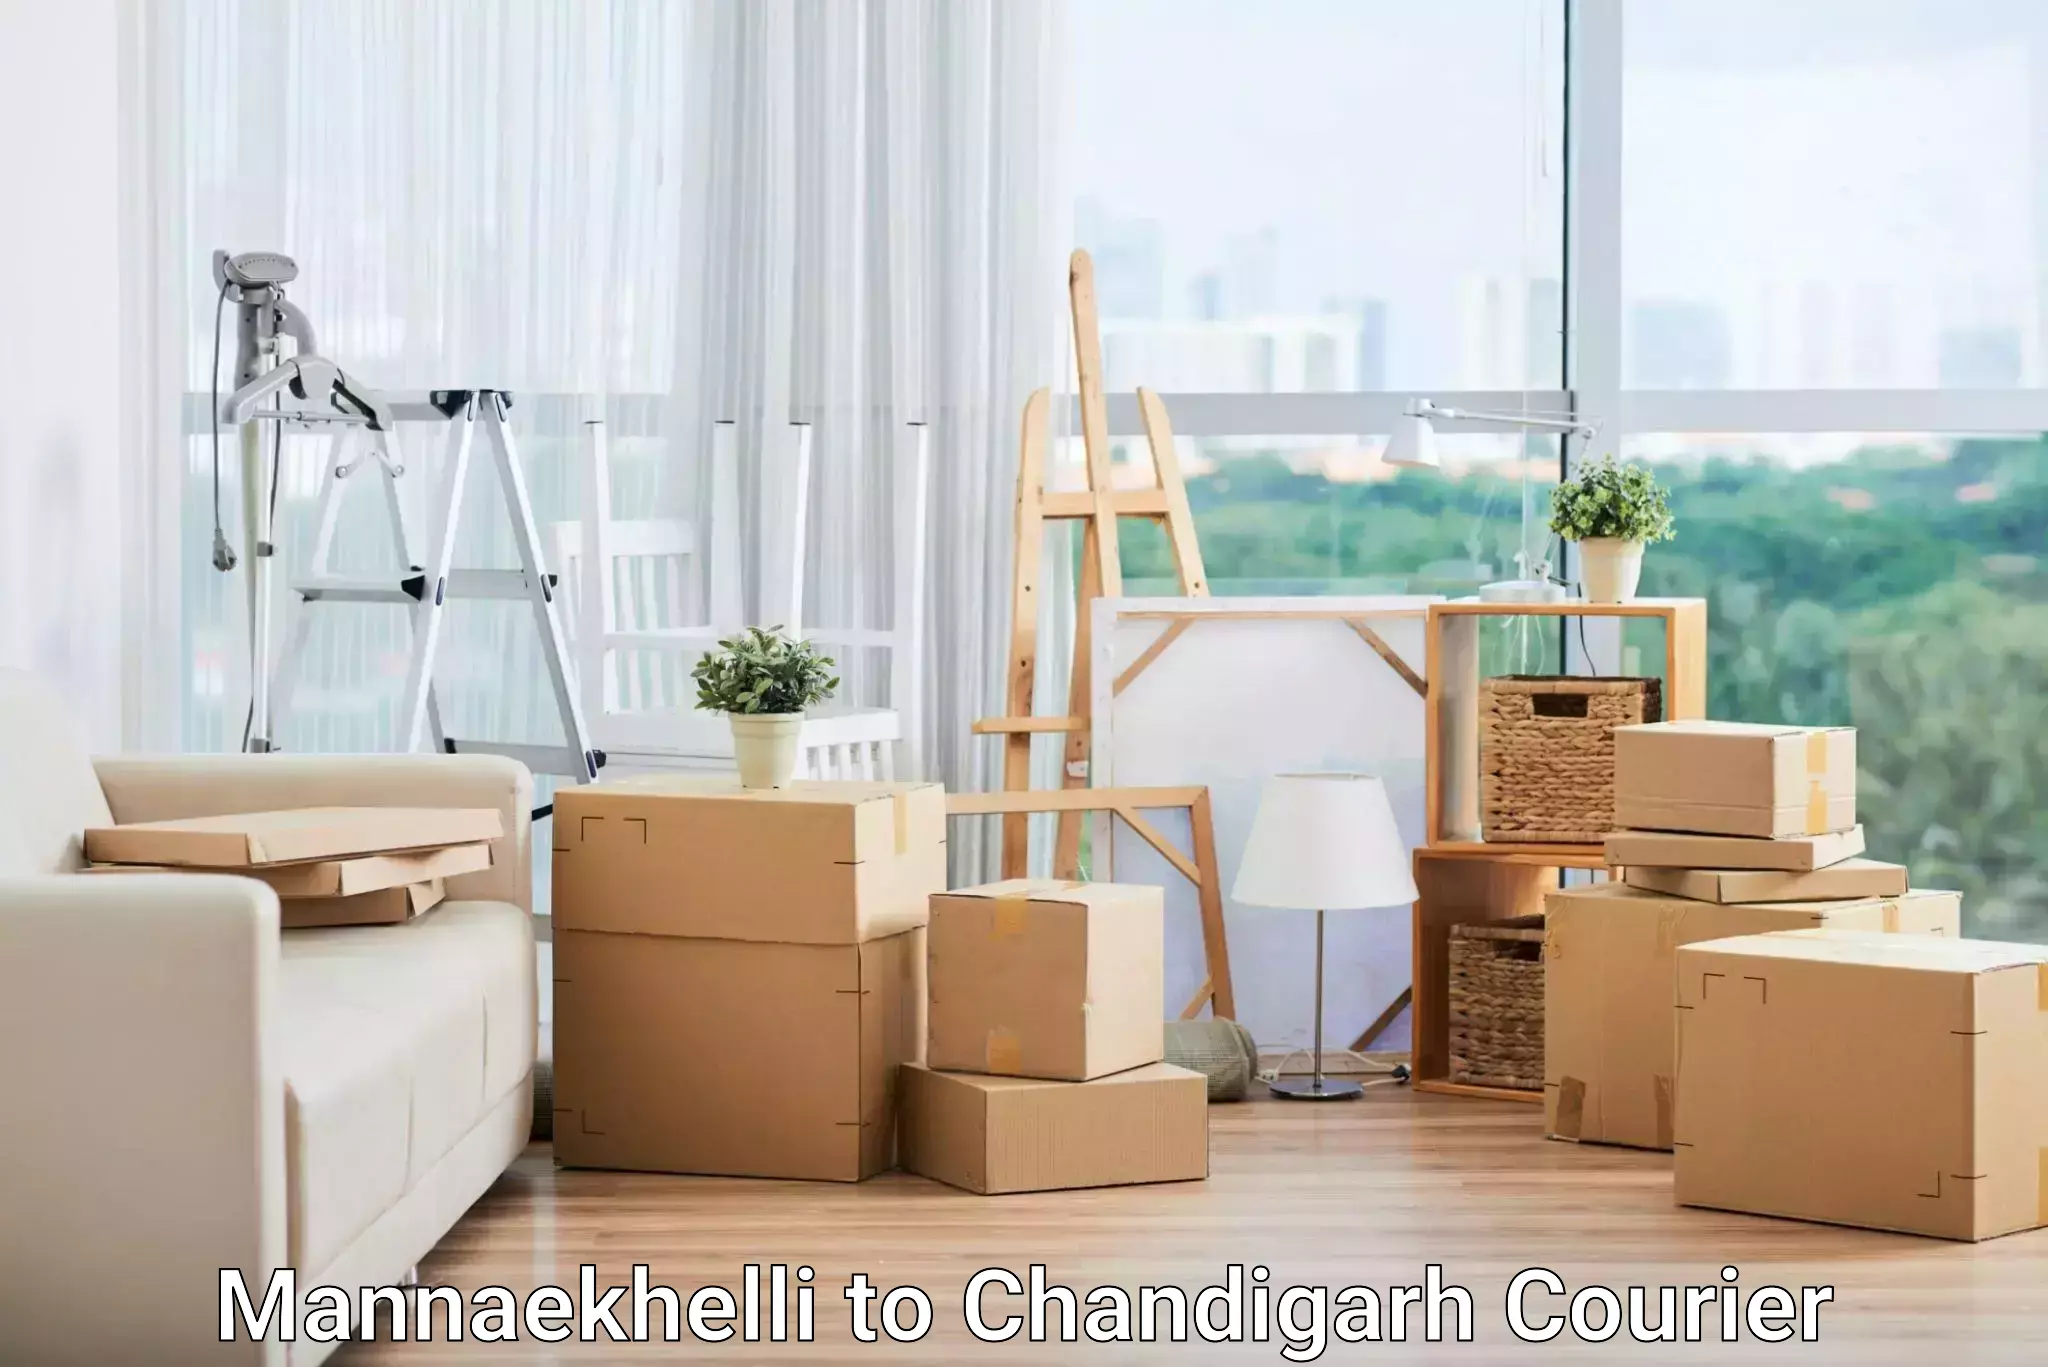 Same-day delivery options Mannaekhelli to Chandigarh